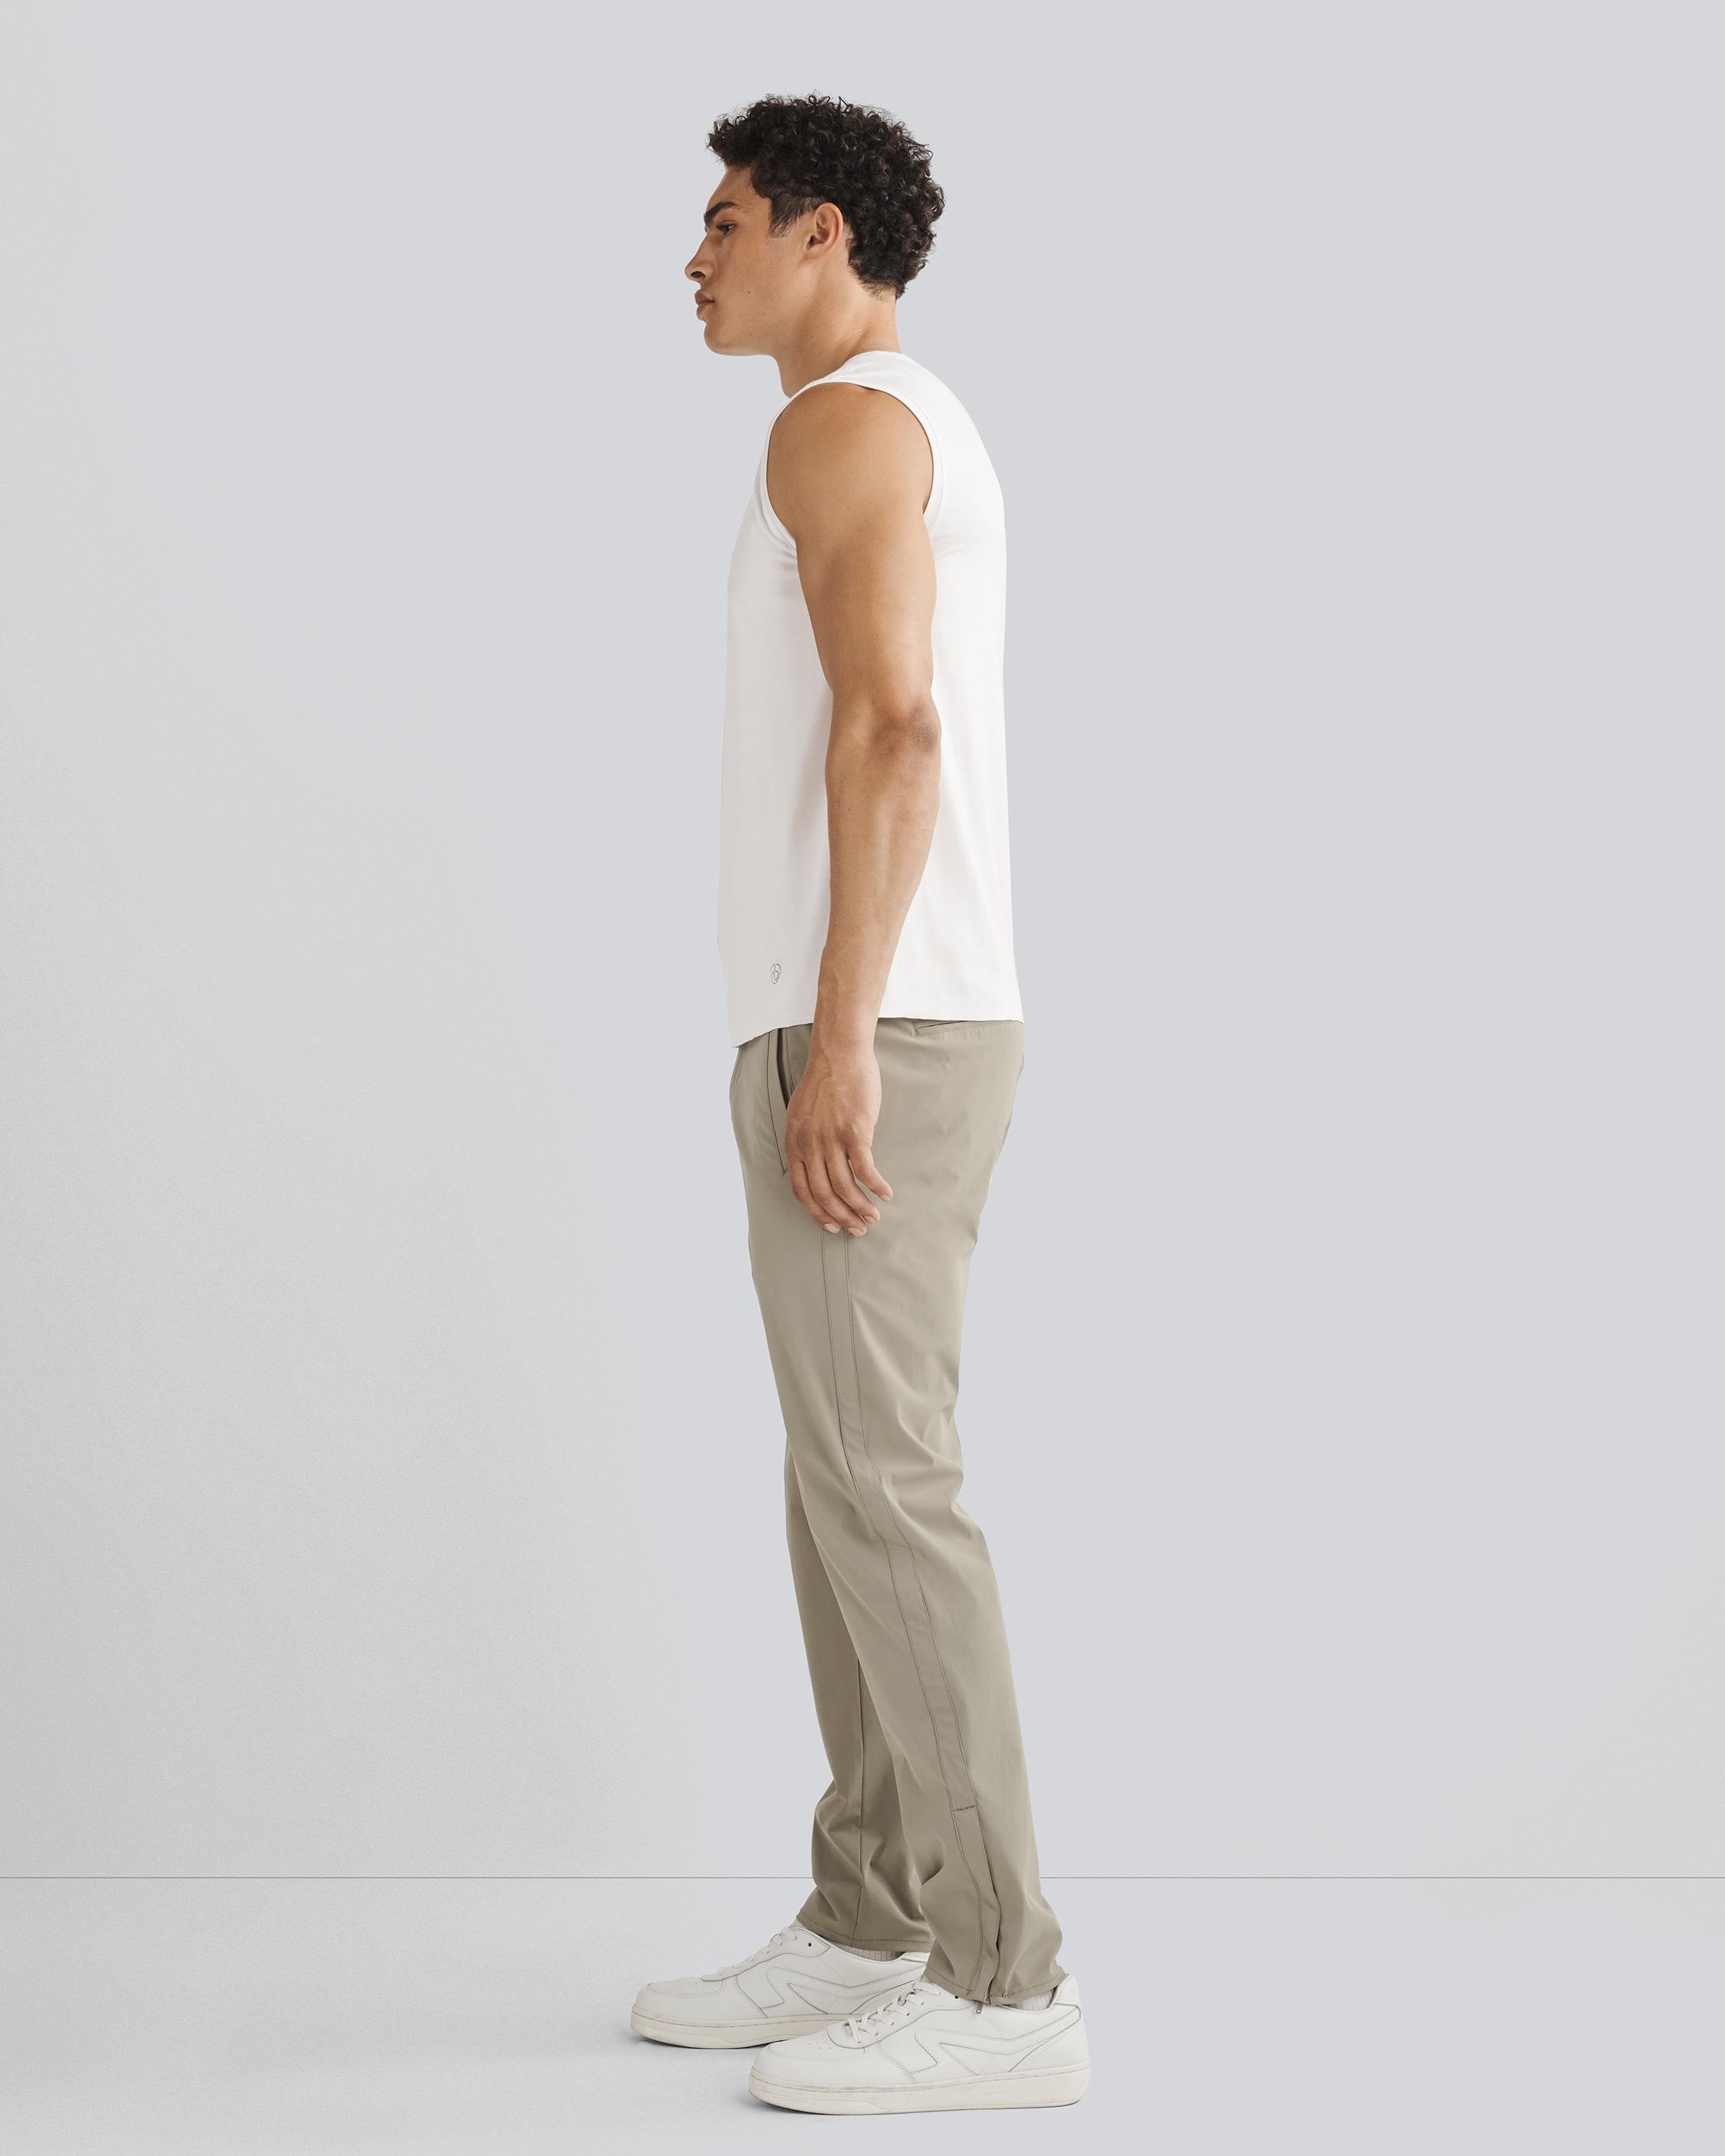 Pursuit Zander Technical Track Pant
Relaxed Fit - 4